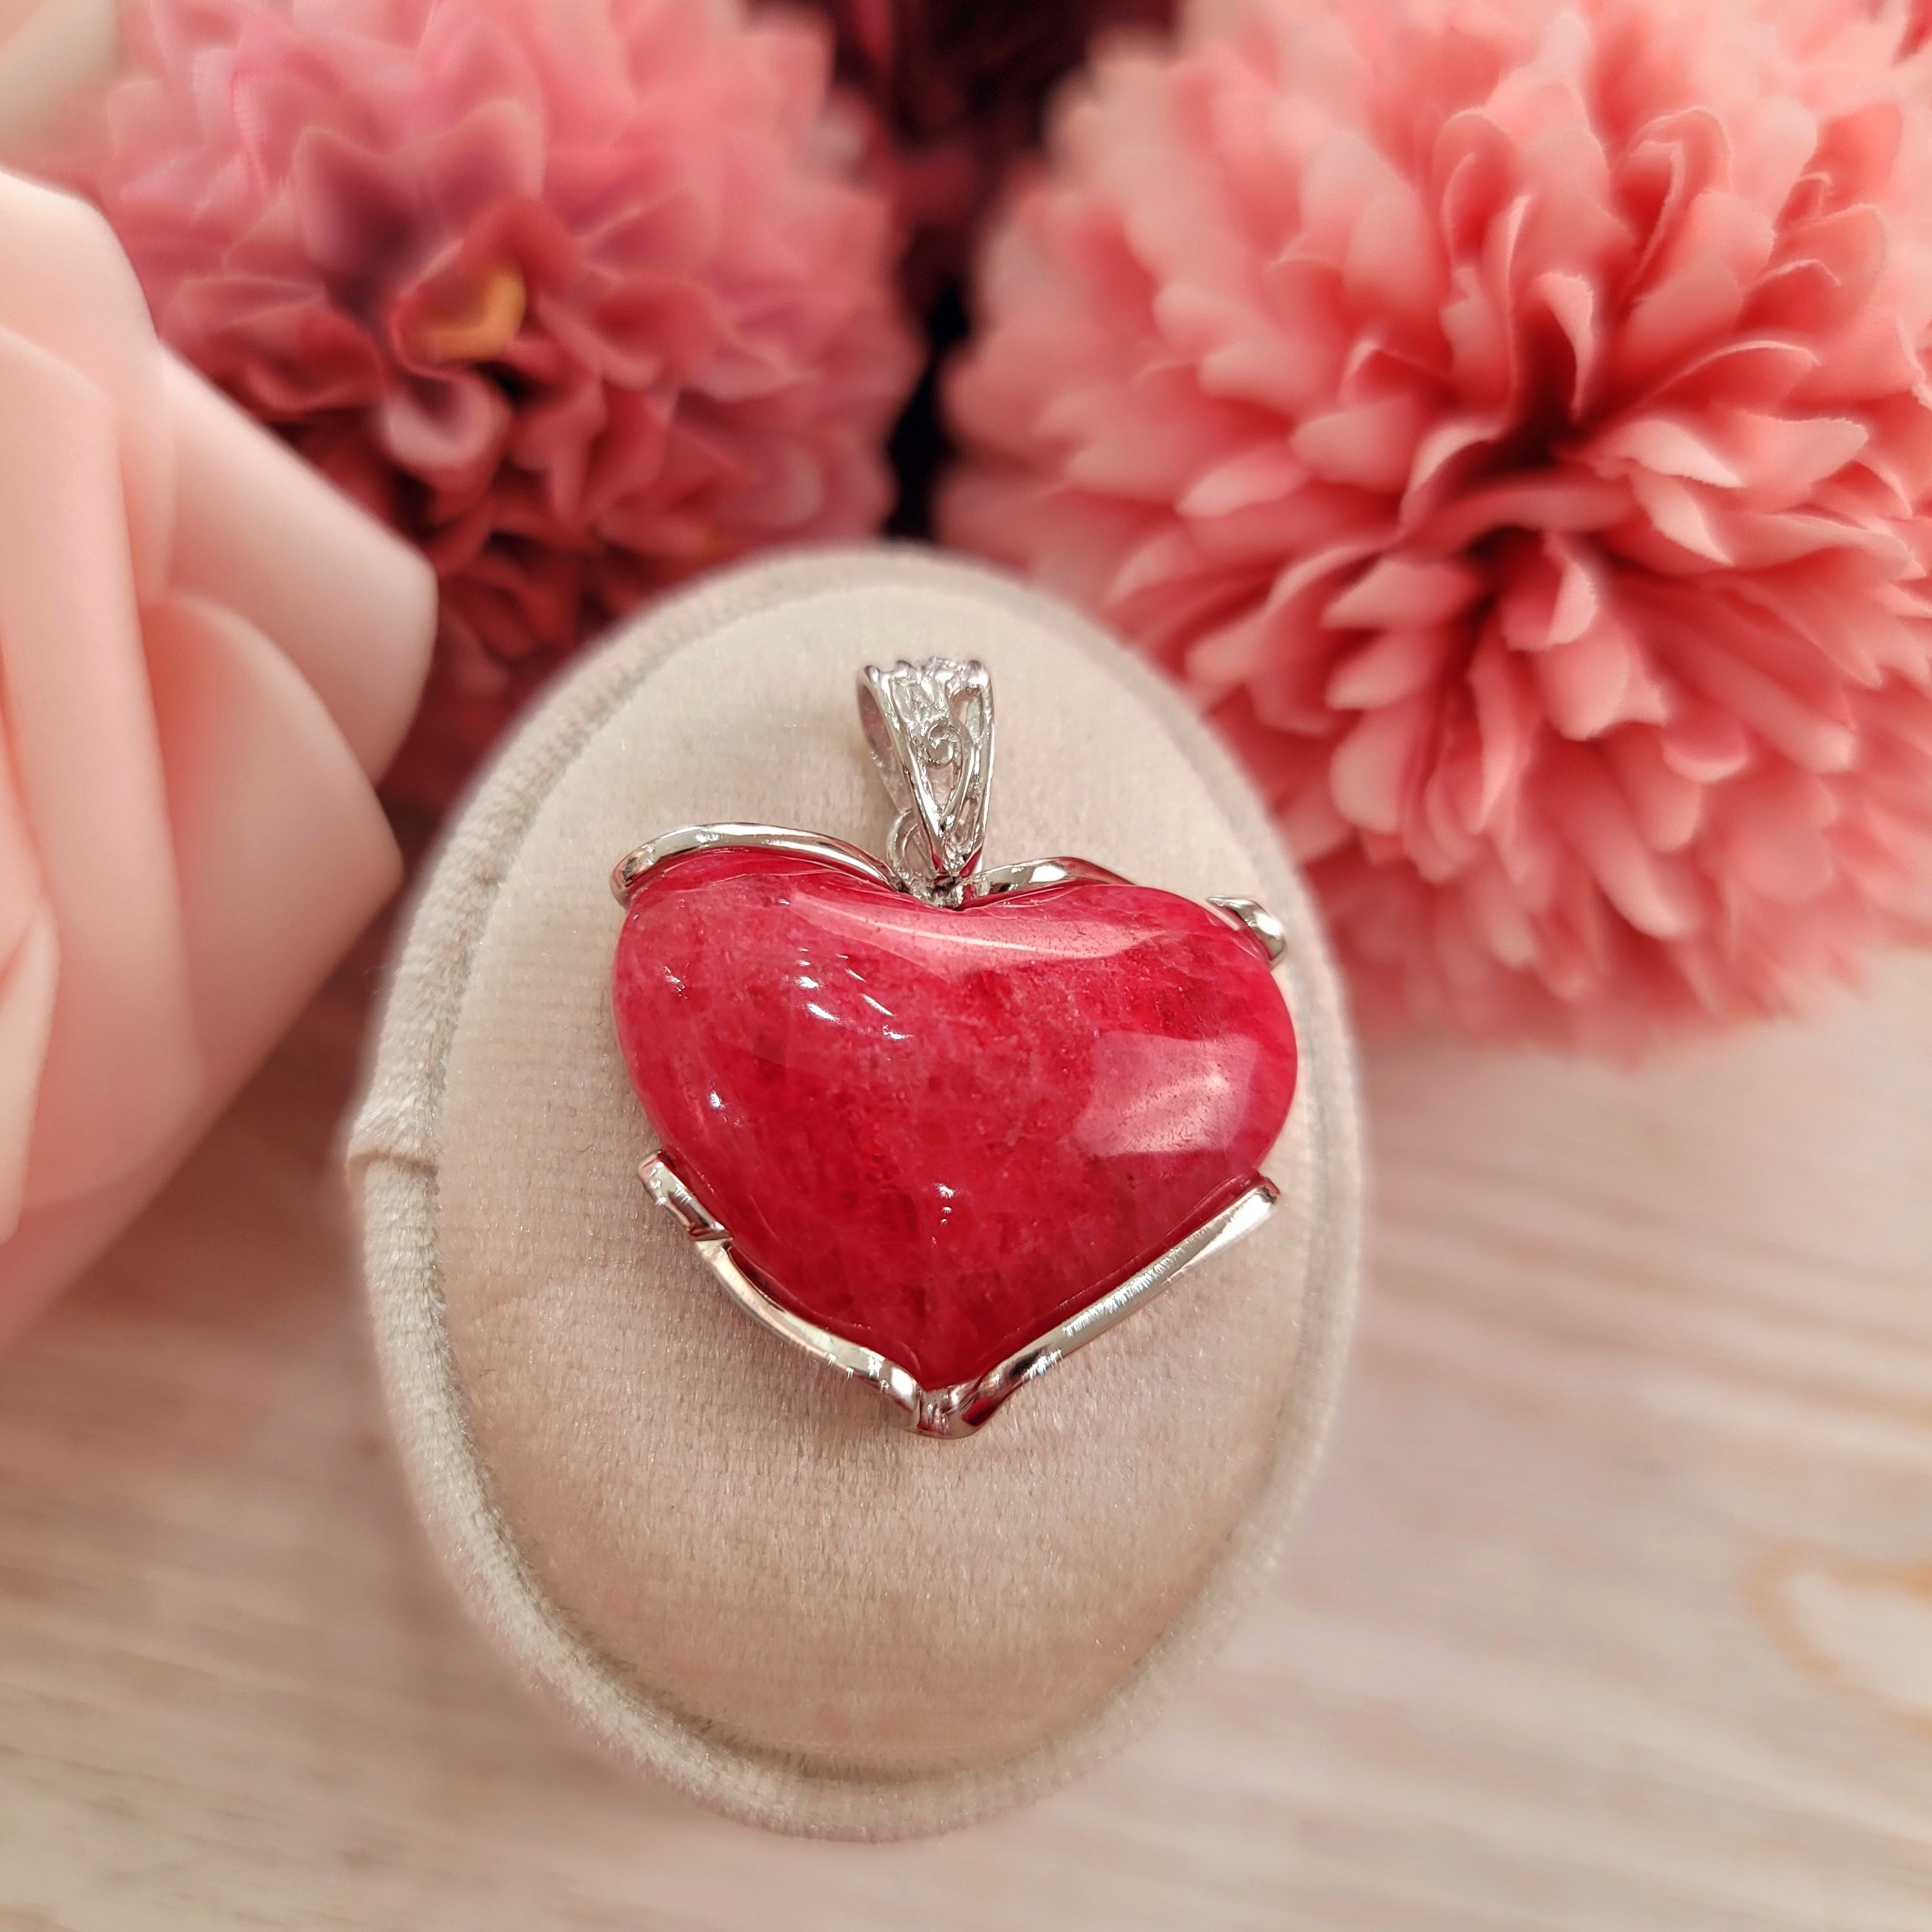 Gem Rhodonite Pendant for Loving Yourself and Enhancing your Self-Worth